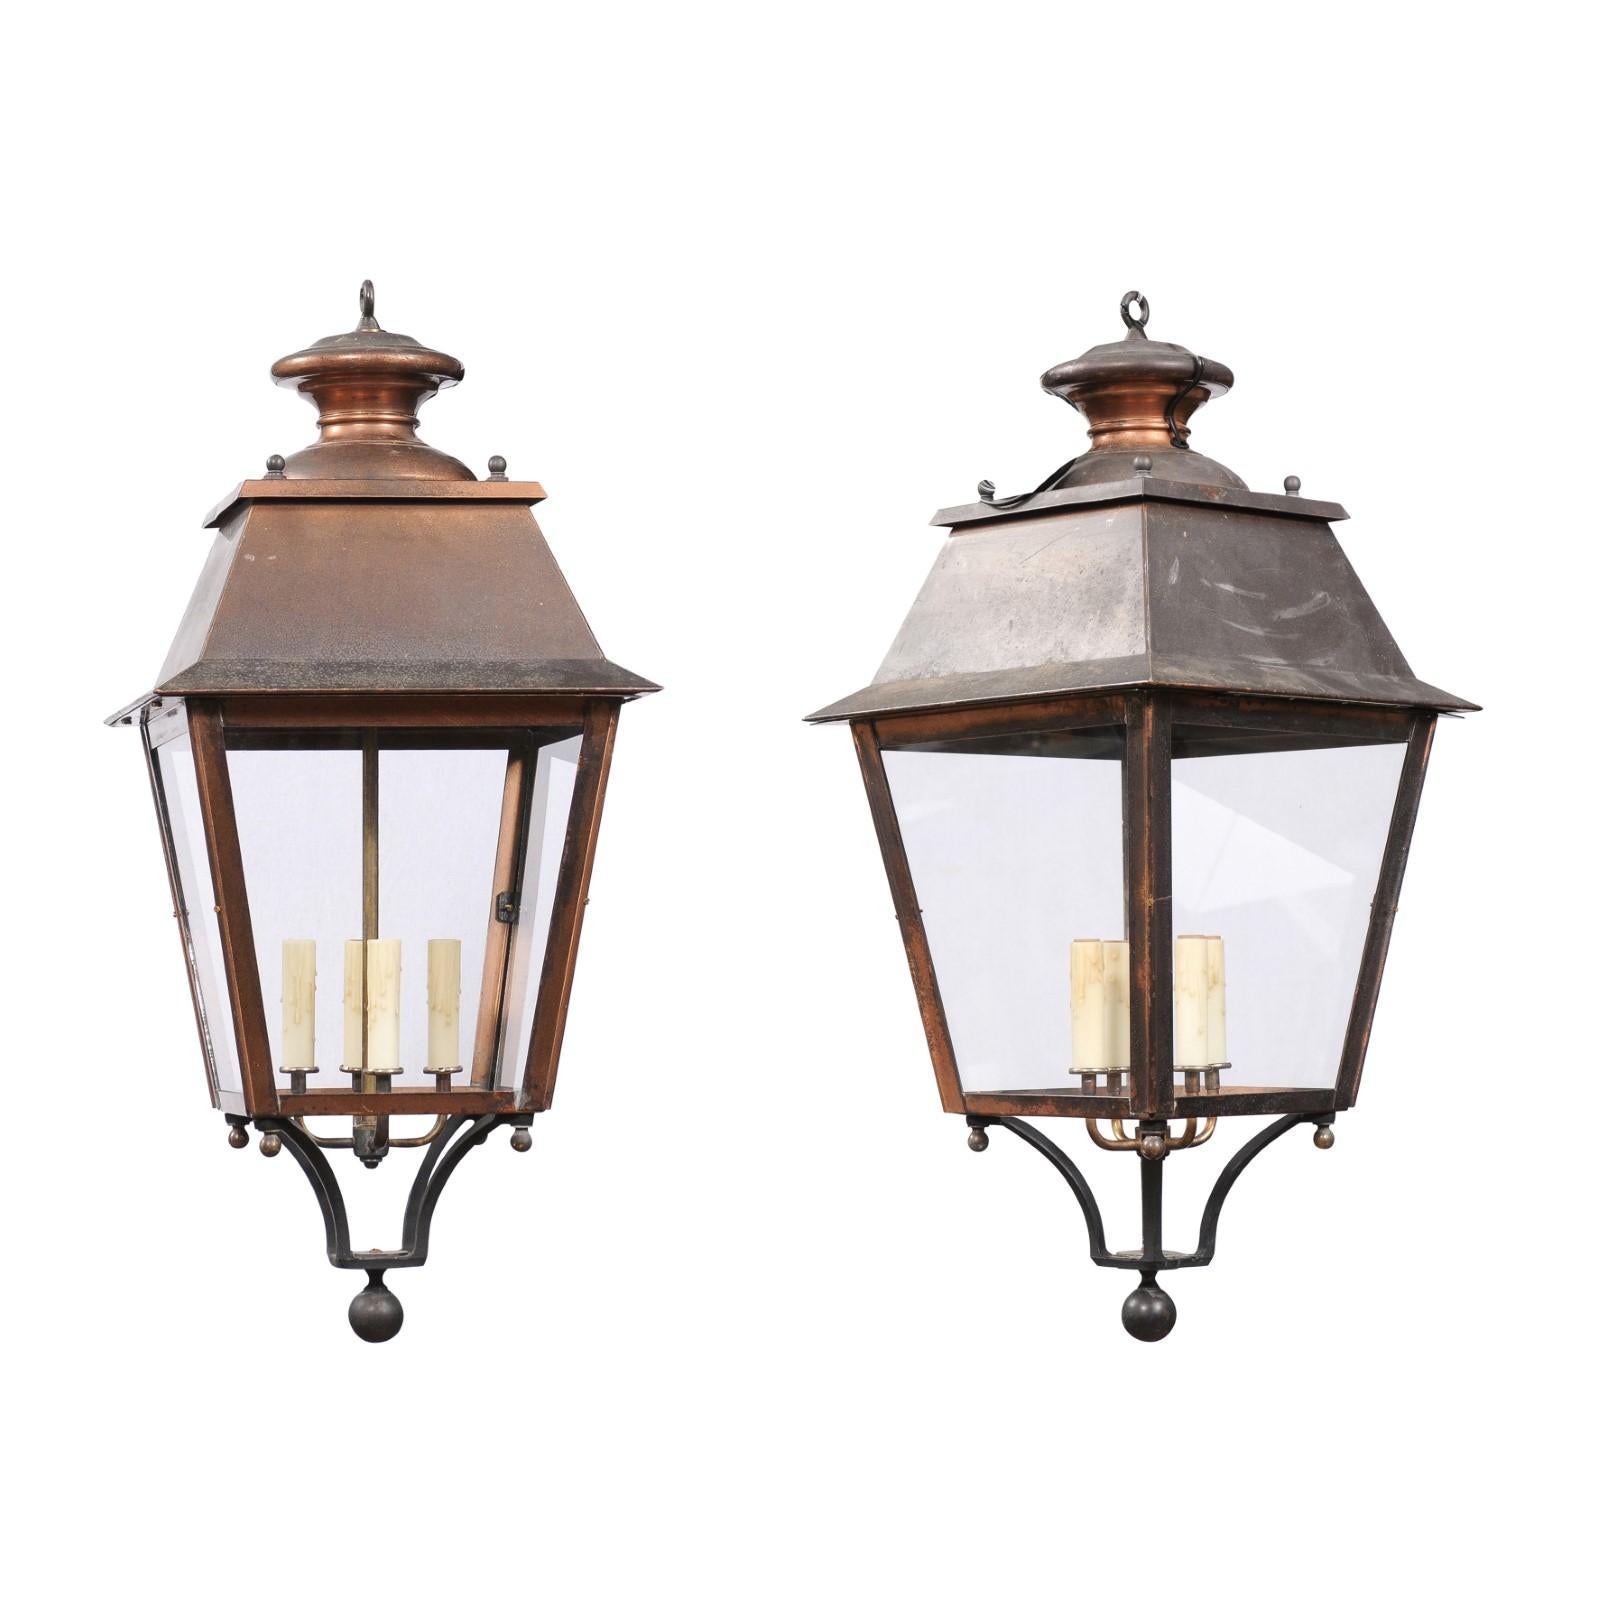 French Four-Light Copper and Glass Tapering Lanterns USA Wired, Two Priced Each For Sale